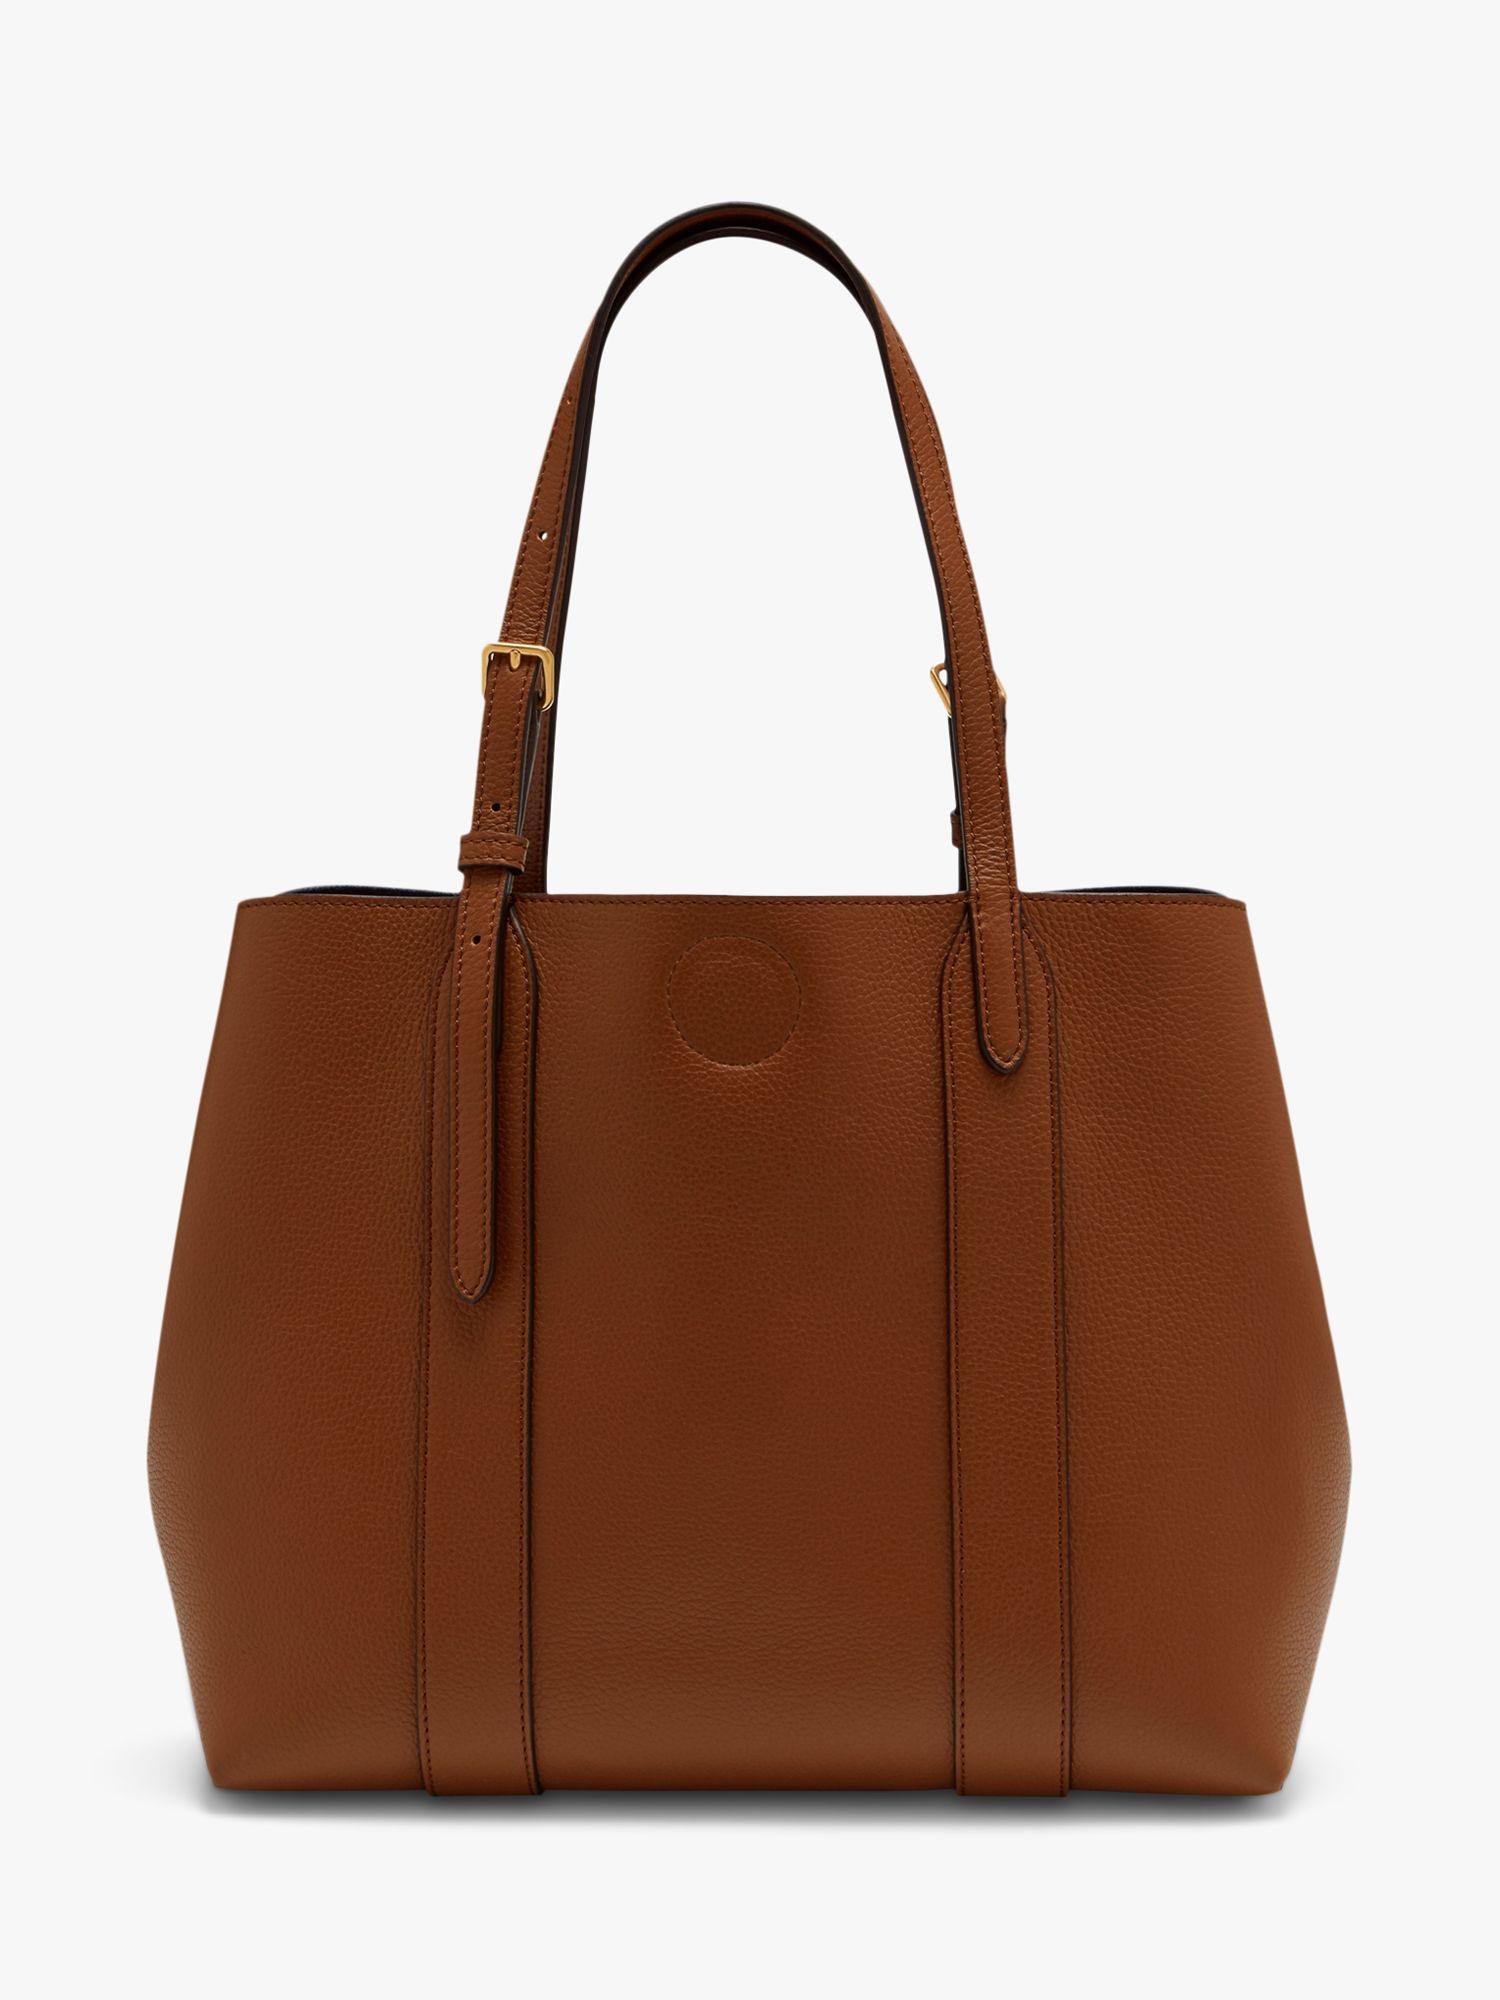 Mulberry Small Bayswater Classic Grain Leather Tote Bag, Oak at John Lewis & Partners